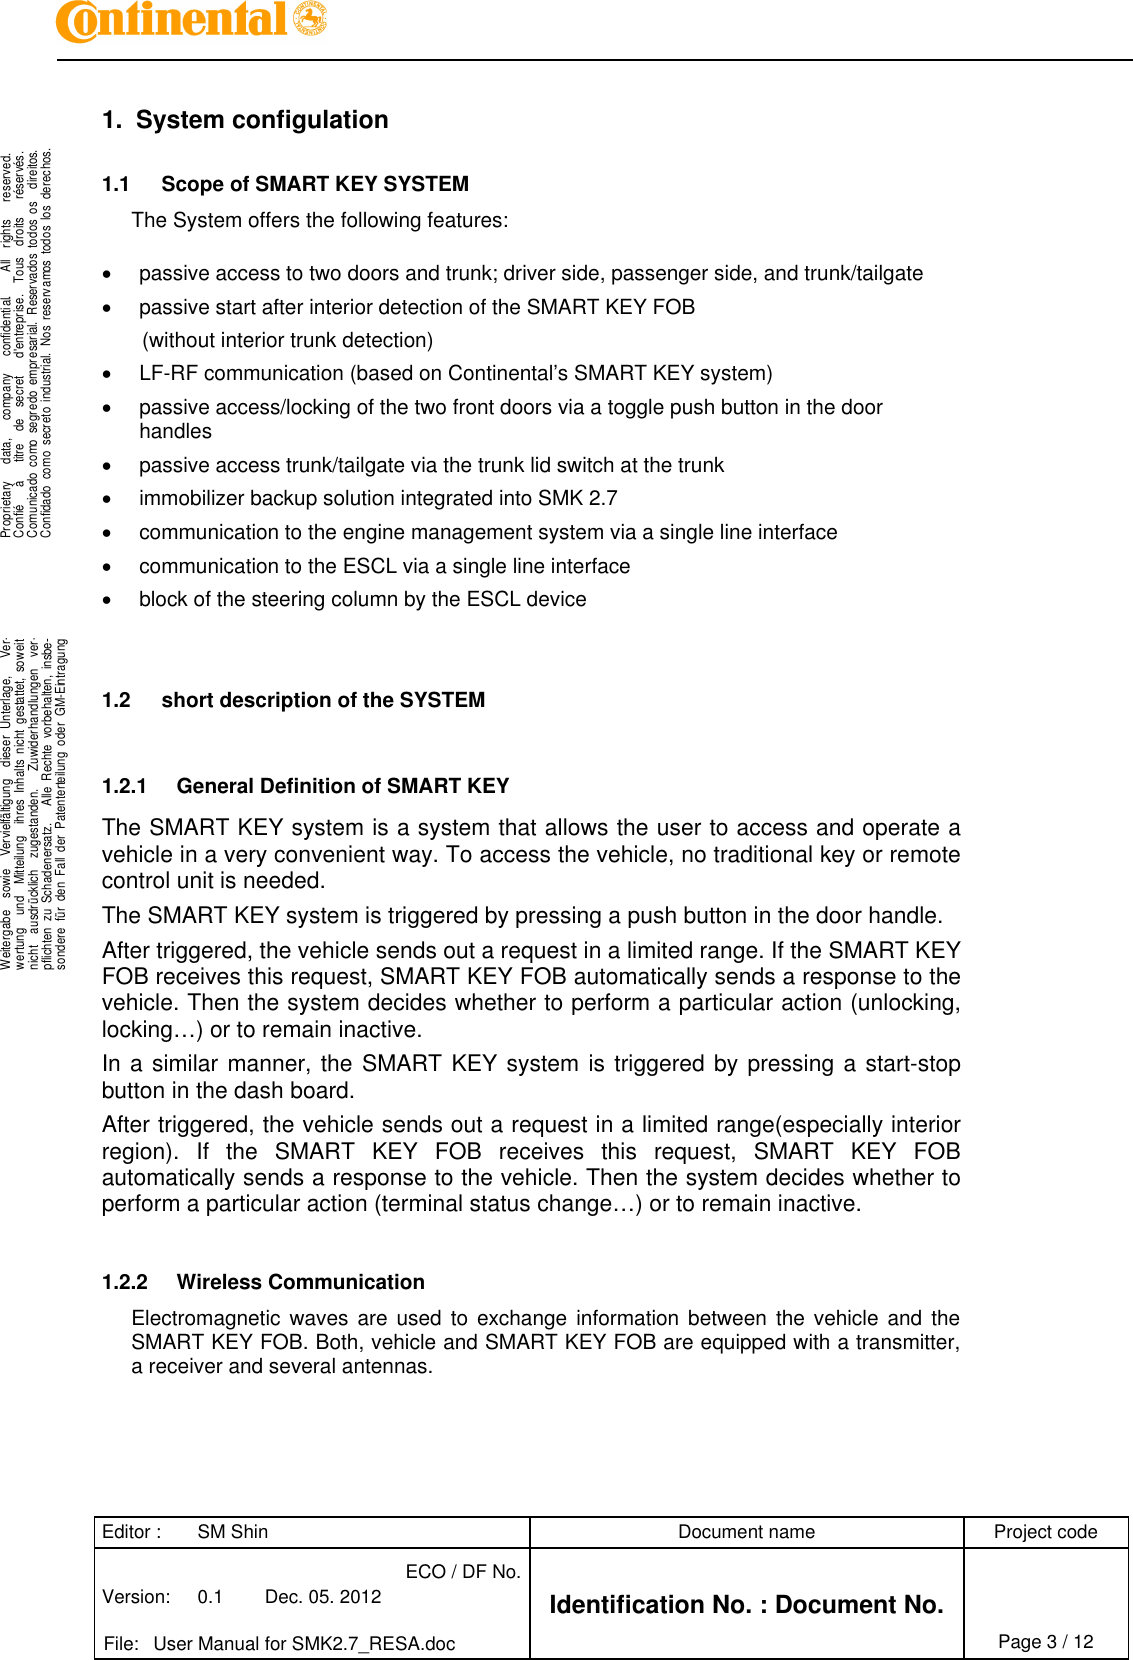 Editor : SM Shin Document name Project codeVersion: 0.1 Dec. 05. 2012ECO / DF No.Identification No. : Document No.File: User Manual for SMK2.7_RESA.doc Page 3 / 12.Proprietary data, company confidential. All rights reserved.Confié à titre de secret d&apos;entreprise. Tous droits réservés.Comunicado como segredo empresarial. Reservados todos os direitos.Confidado como secreto industrial. Nos reservamos todos los derechos...Weitergabe sowie Vervielfältigung dieser Unterlage, Ver-wertung und Mitteilung ihres Inhalts nicht gestattet, soweitnicht ausdrücklich zugestanden. Zuwiderhandlungen ver-pflichten zu Schadenersatz. Alle Rechte vorbehalten, insbe-sondere für den Fall der Patenterteilung oder GM-Eintragung..1. System configulation1.1 Scope of SMART KEY SYSTEMThe System offers the following features:passive access to two doors and trunk; driver side, passenger side, and trunk/tailgatepassive start after interior detection of the SMART KEY FOB(without interior trunk detection)LF-RF communication (based on Continental’s SMART KEY system)passive access/locking of the two front doors via a toggle push button in the doorhandlespassive access trunk/tailgate via the trunk lid switch at the trunkimmobilizer backup solution integrated into SMK 2.7communication to the engine management system via a single line interfacecommunication to the ESCL via a single line interfaceblock of the steering column by the ESCL device1.2 short description of the SYSTEM1.2.1 General Definition of SMART KEYThe SMART KEY system is a system that allows the user to access and operate avehicle in a very convenient way. To access the vehicle, no traditional key or remotecontrol unit is needed.The SMART KEY system is triggered by pressing a push button in the door handle.After triggered, the vehicle sends out a request in a limited range. If the SMART KEYFOB receives this request, SMART KEY FOB automatically sends a response to thevehicle. Then the system decides whether to perform a particular action (unlocking,locking…) or to remain inactive.In a similar manner, the SMART KEY system is triggered by pressing a start-stopbutton in the dash board.After triggered, the vehicle sends out a request in a limited range(especially interiorregion). If the SMART KEY FOB receives this request, SMART KEY FOBautomatically sends a response to the vehicle. Then the system decides whether toperform a particular action (terminal status change…) or to remain inactive.1.2.2 Wireless CommunicationElectromagnetic waves are used to exchange information between the vehicle and theSMART KEY FOB. Both, vehicle and SMART KEY FOB are equipped with a transmitter,a receiver and several antennas.